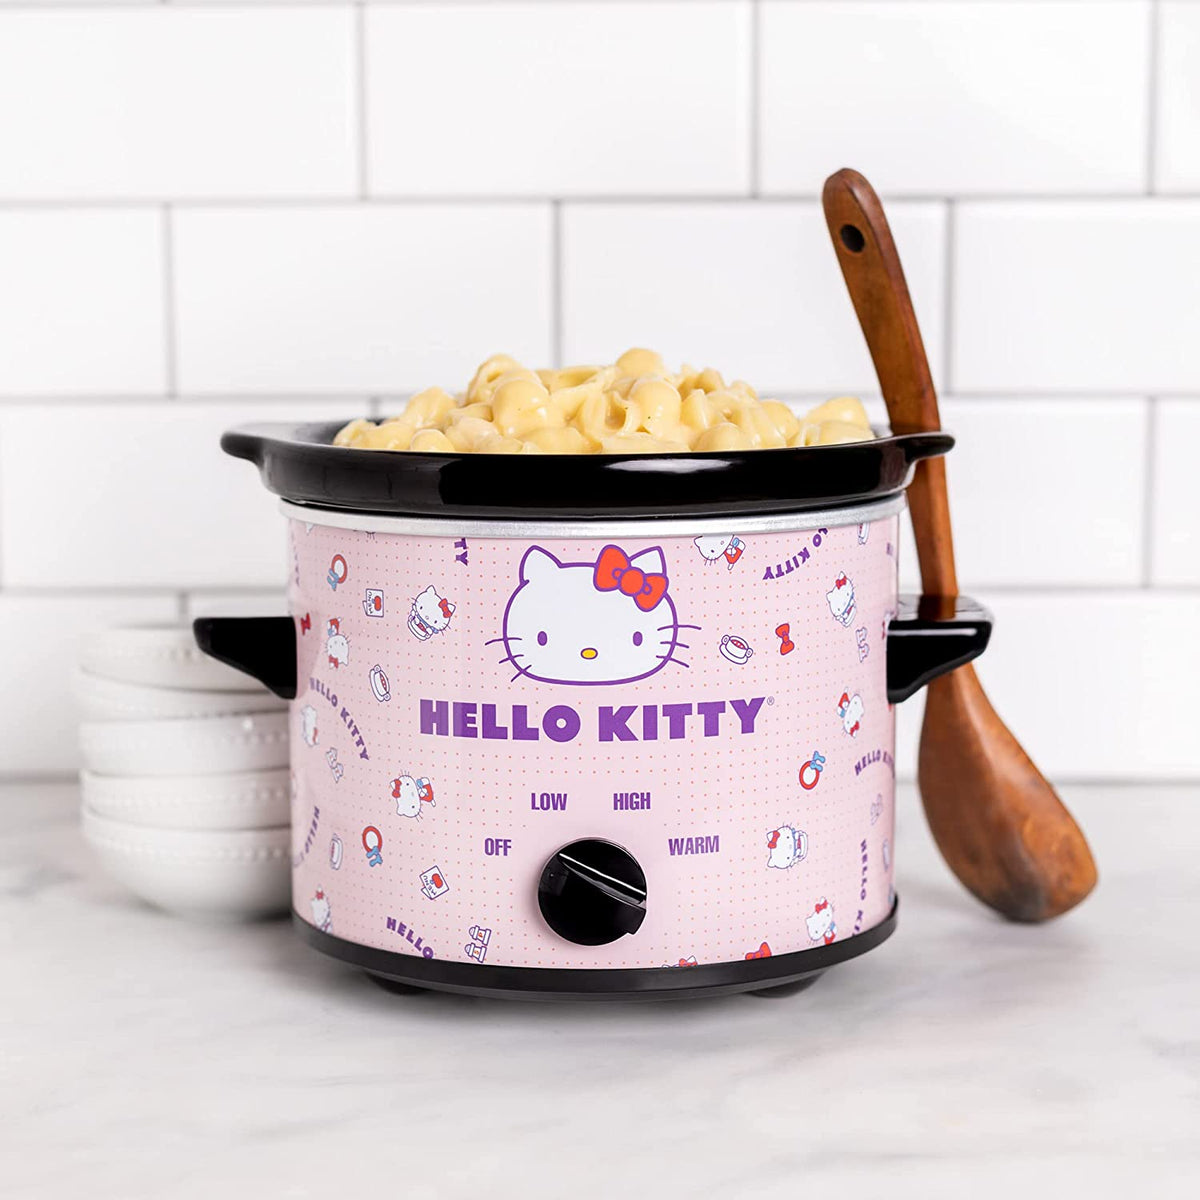 Perfect cool day for a warm apple crisp in my Hello Kitty Crockpot. : r/ HelloKitty